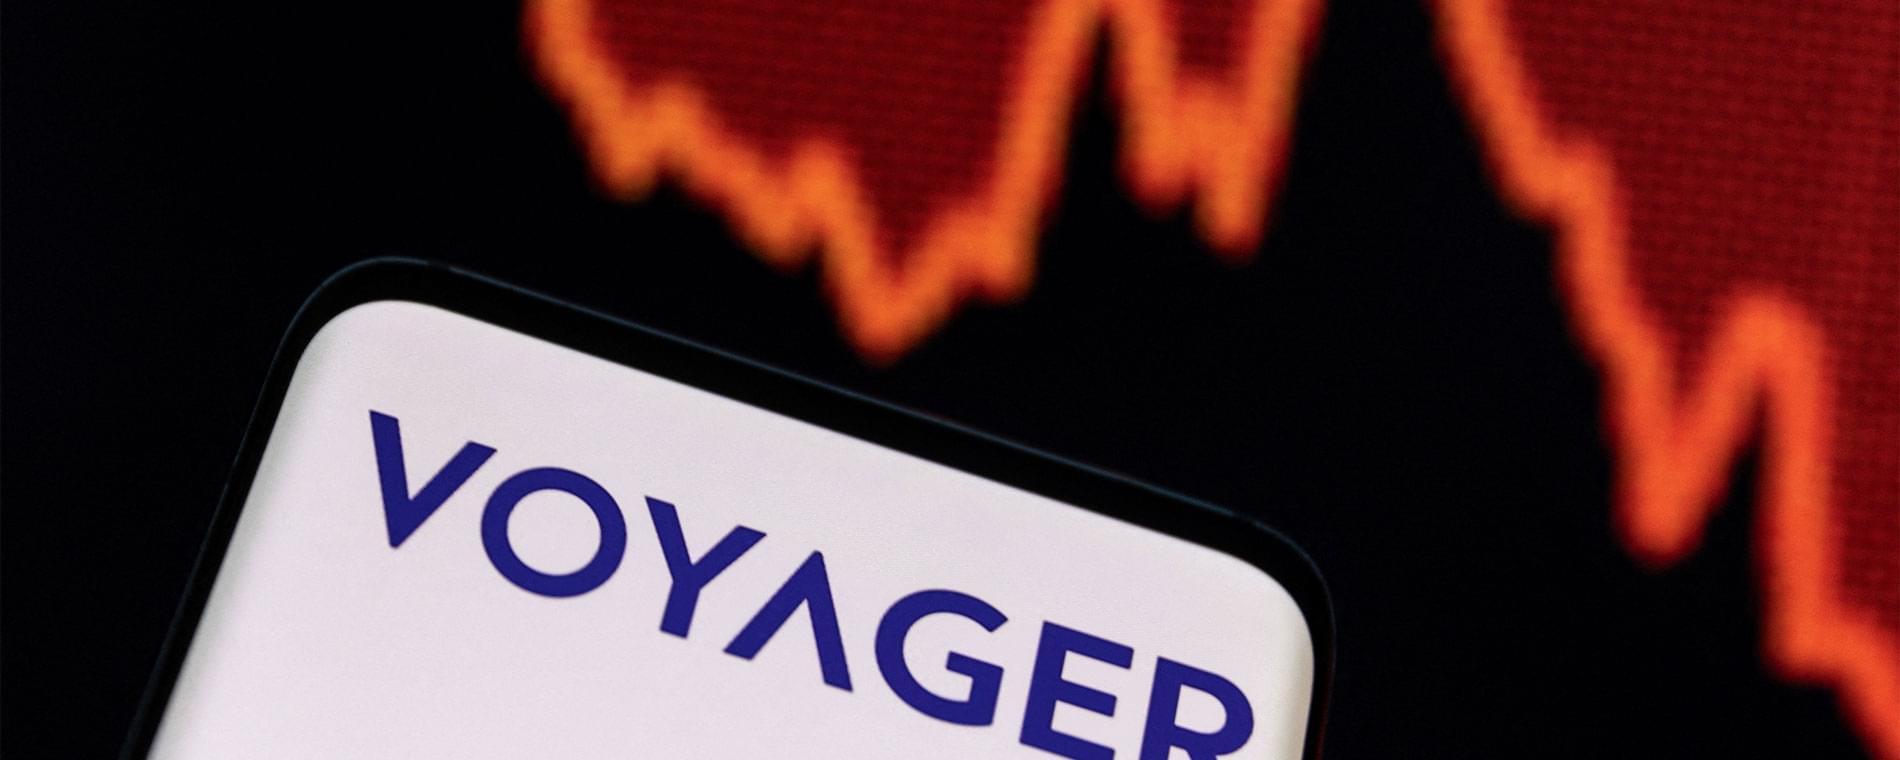 FTX offers partial bailout, which Voyager rebuffs